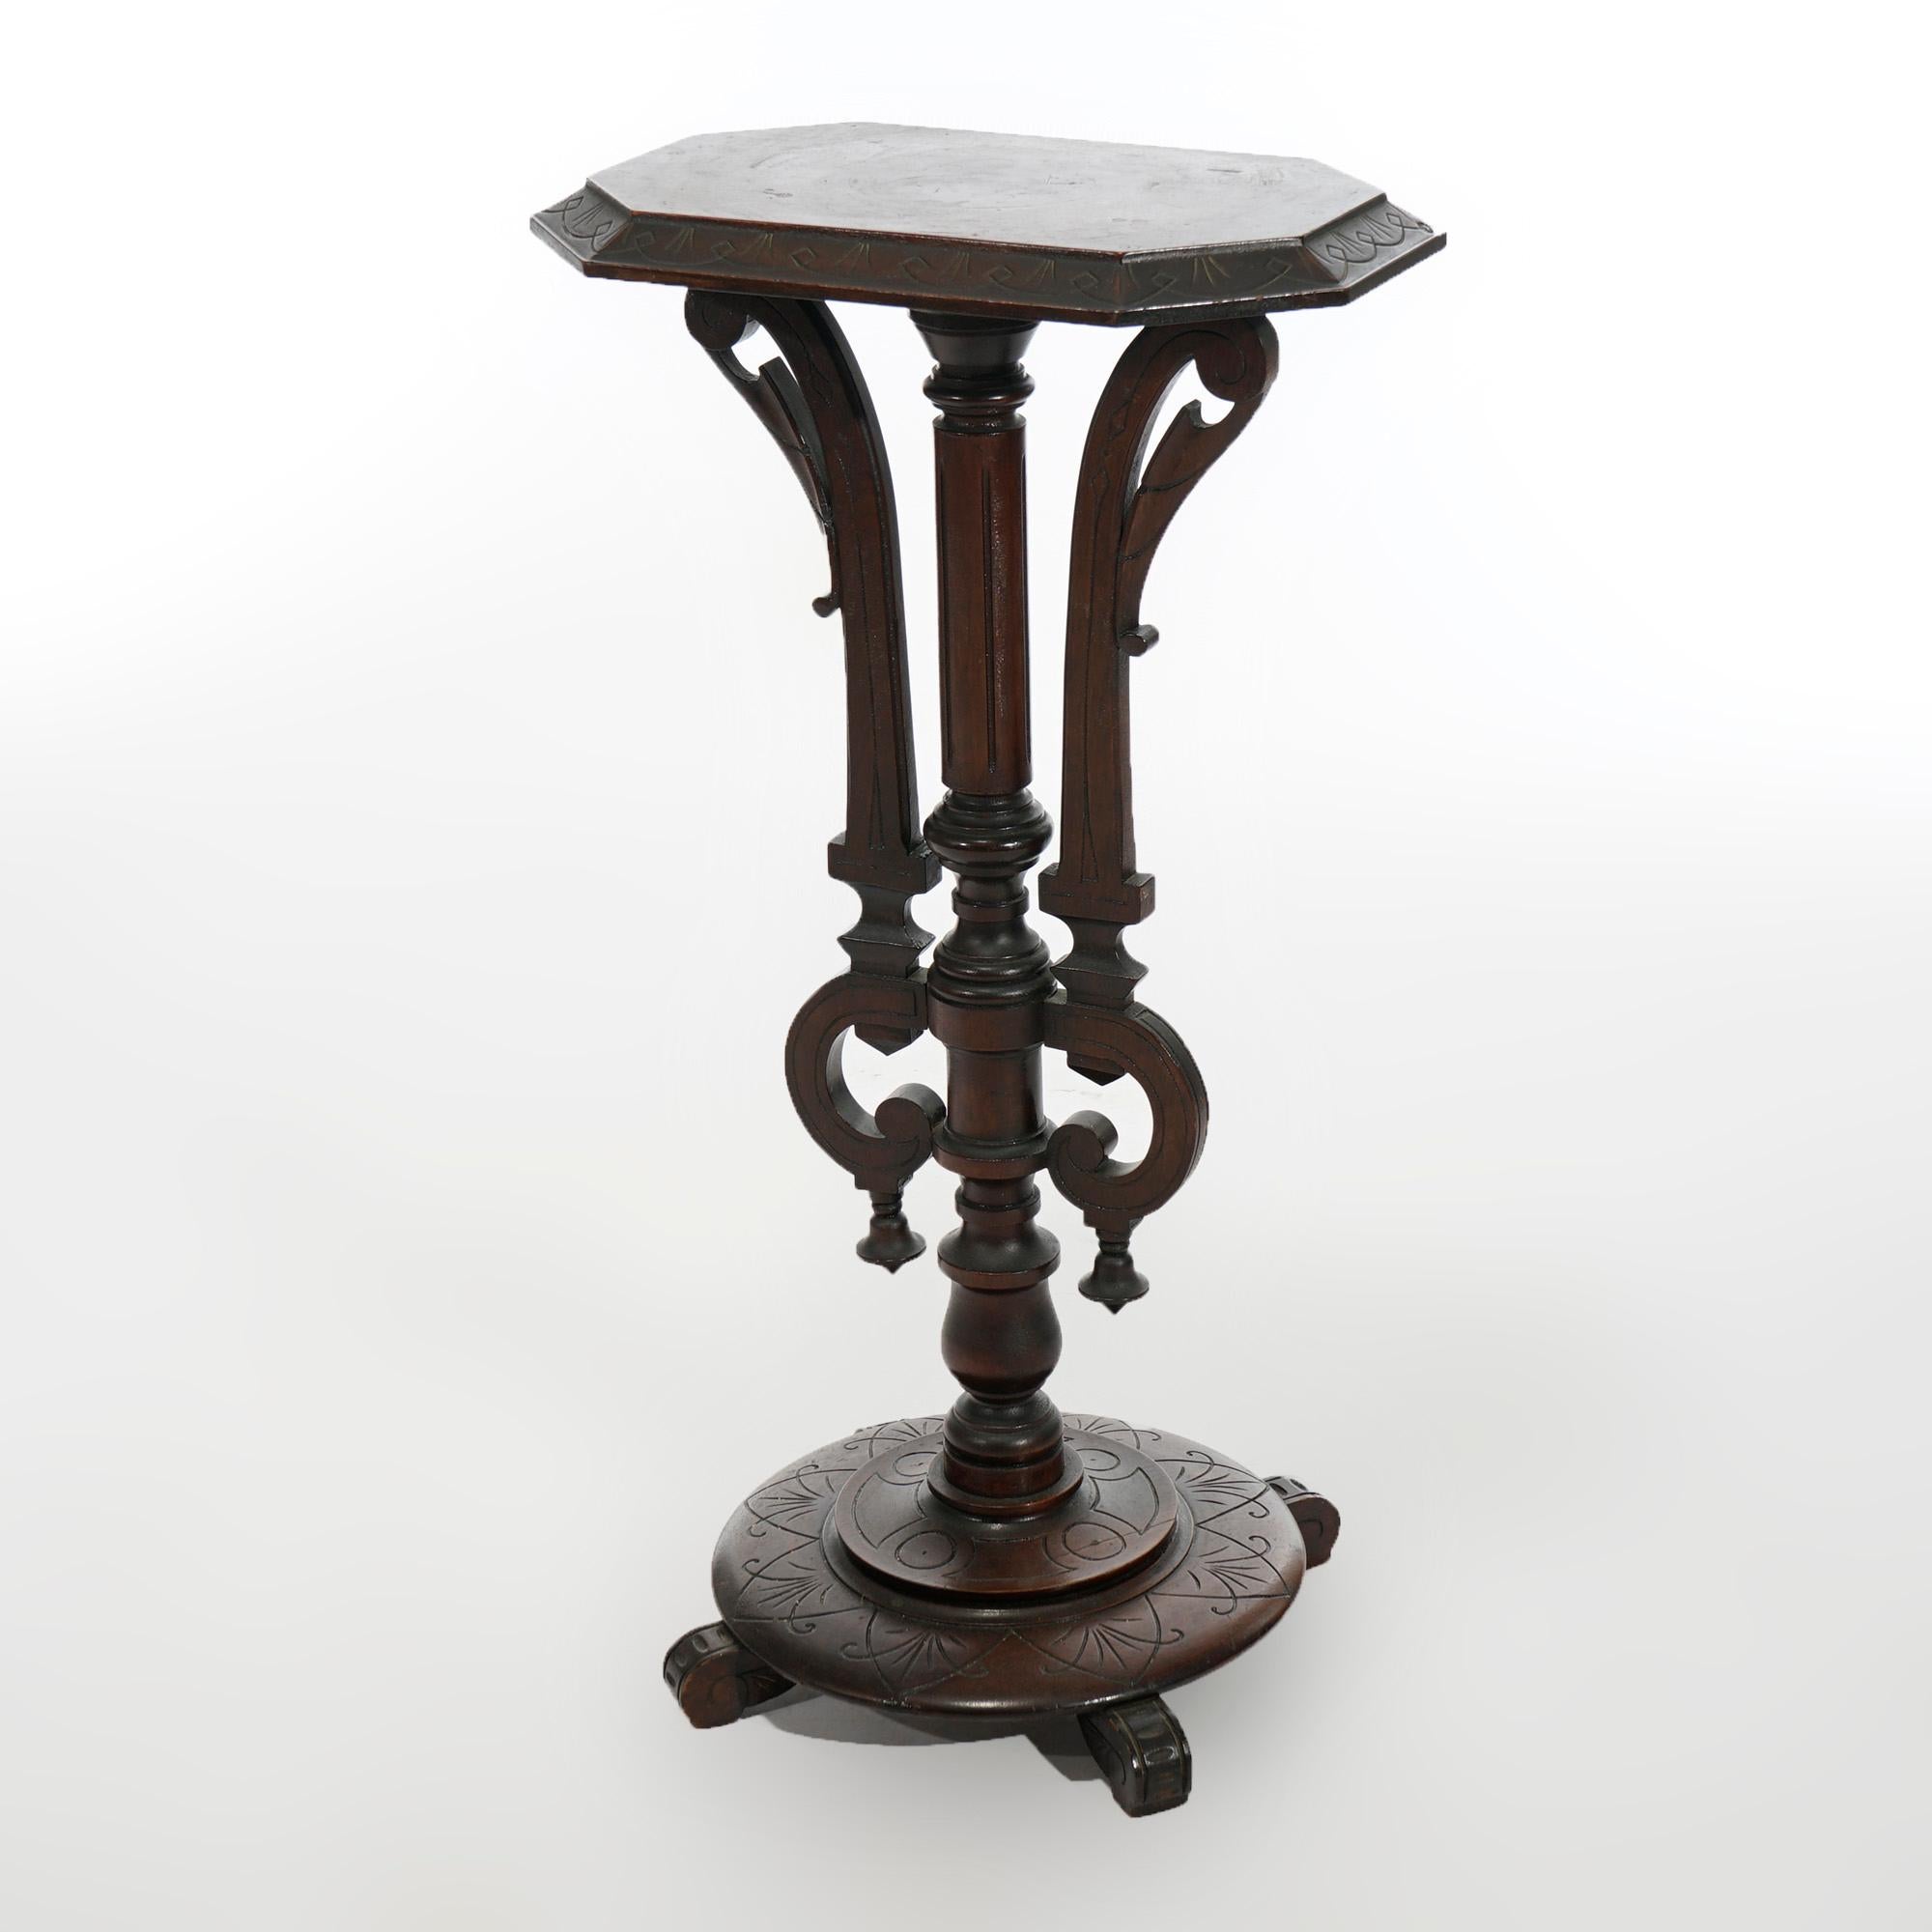 19th Century Antique Aesthetic Movement Carved Walnut Sculpture Display Pedestal Circa 1890 For Sale